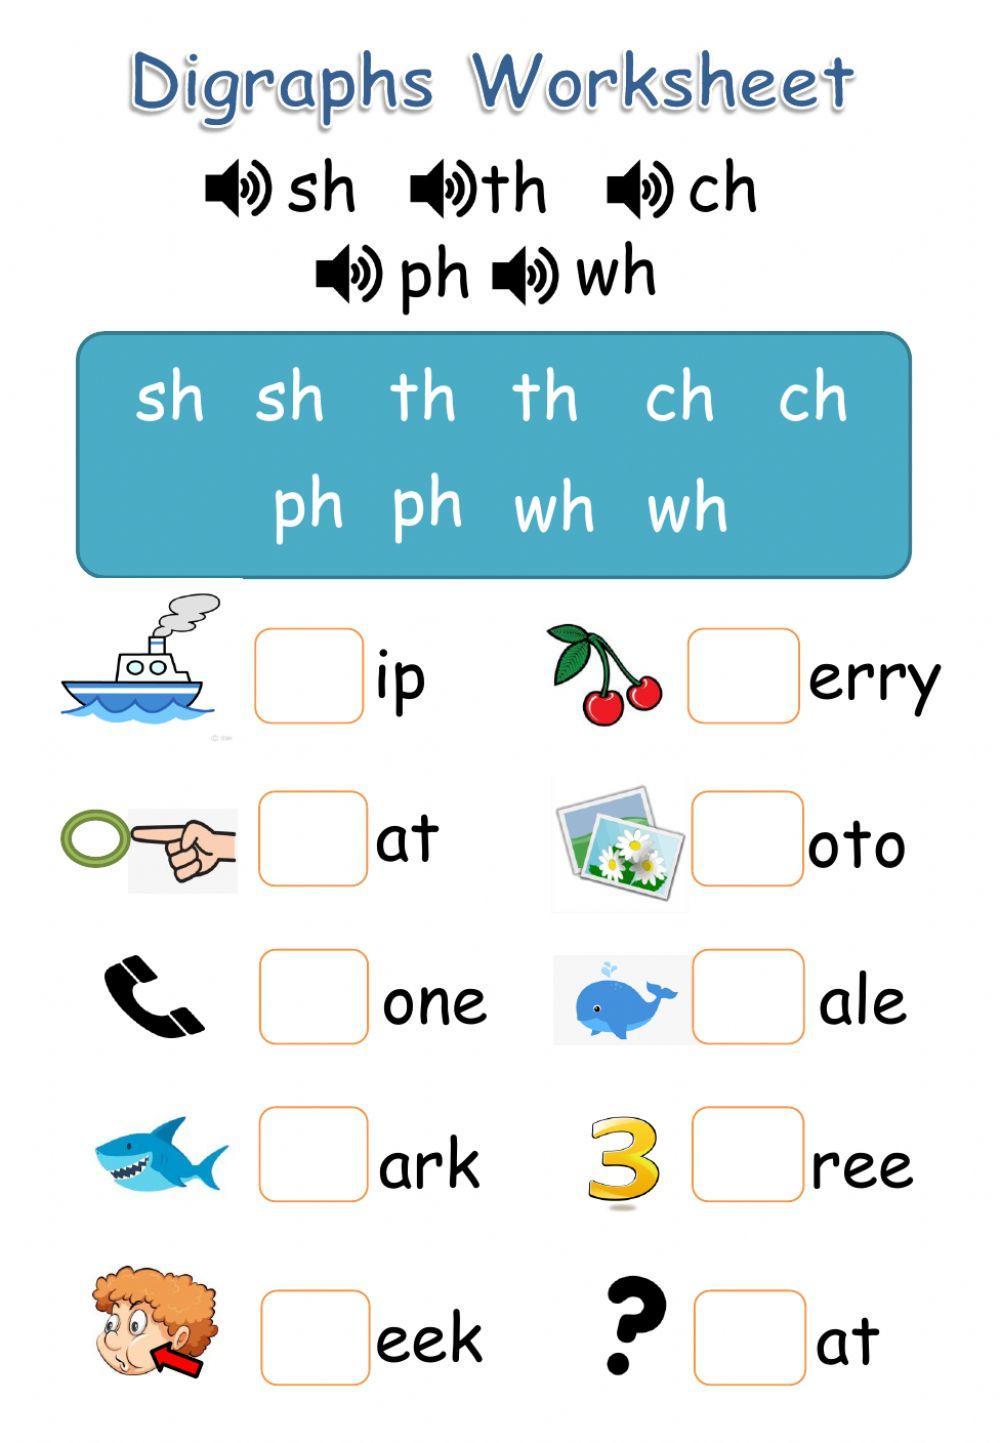 Digraphs(with hints) - SH, TH, CH, PH, WH